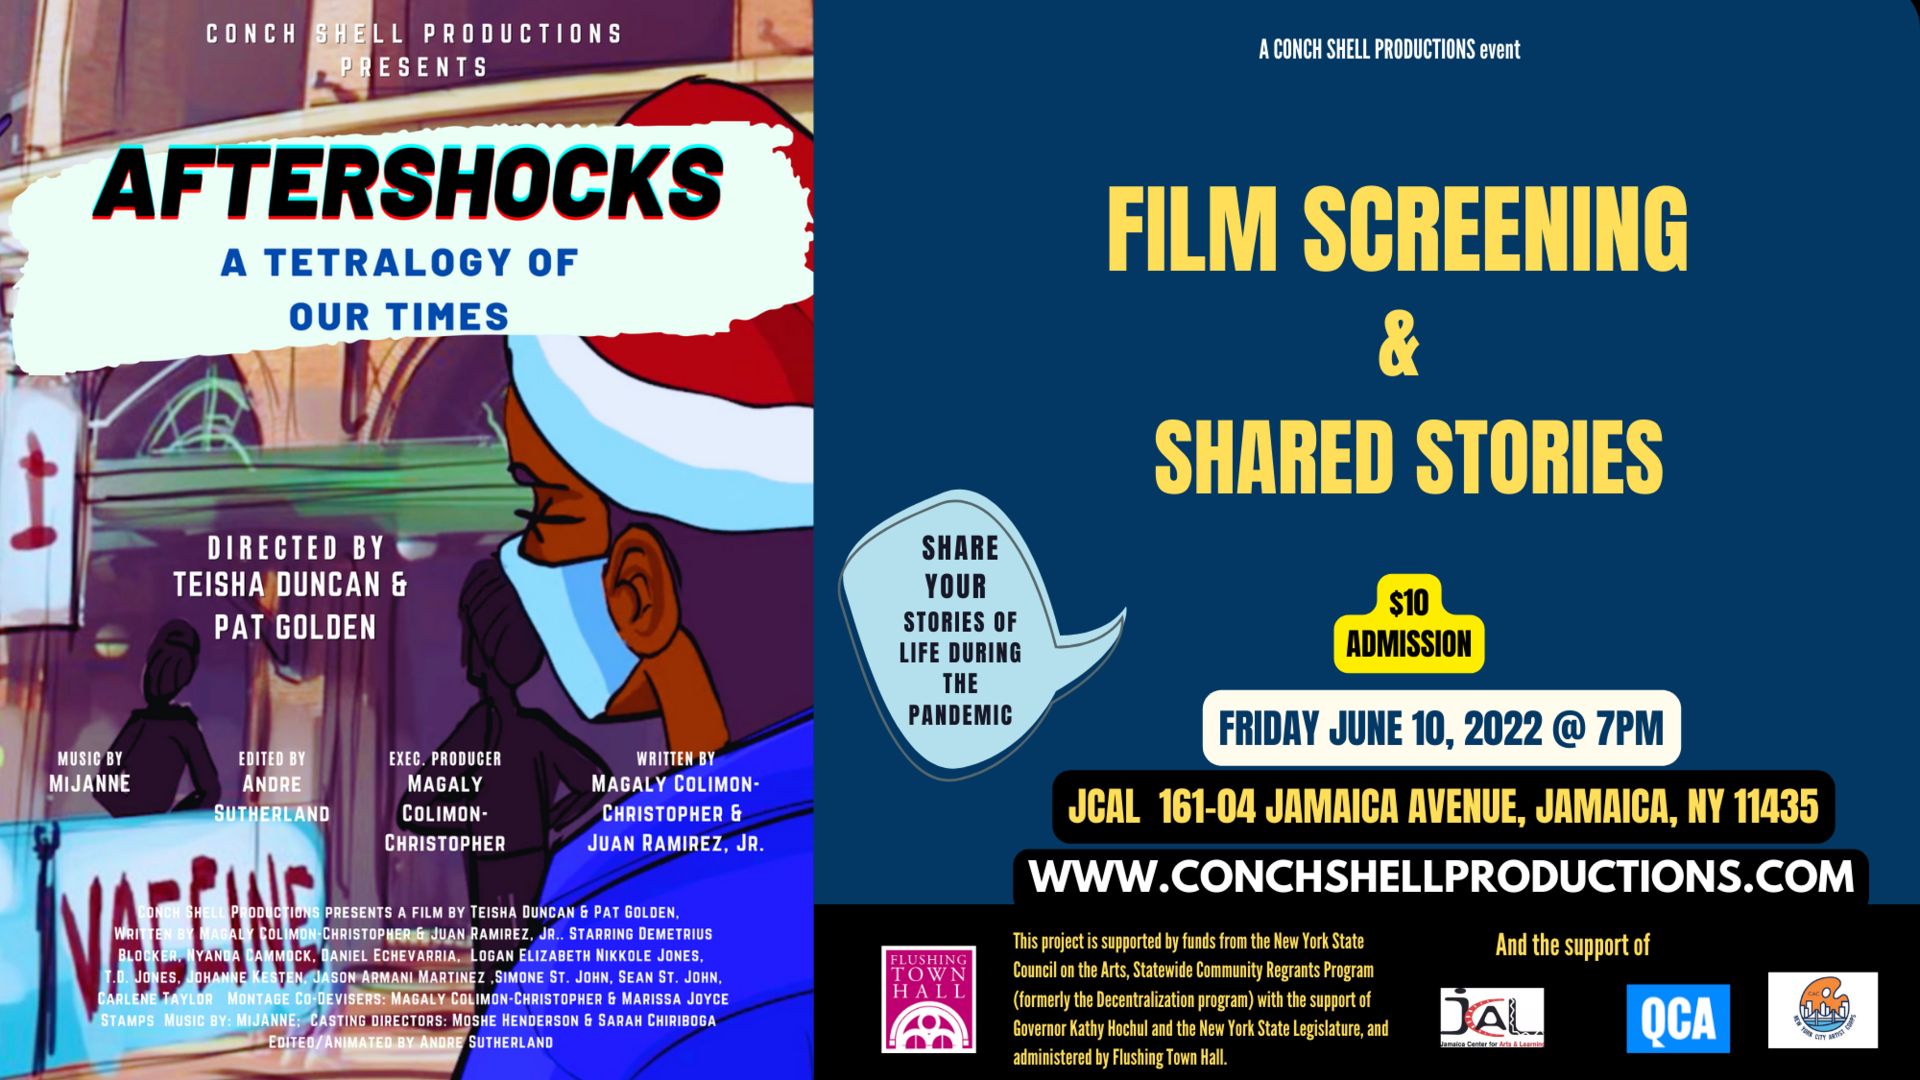 Conch Shell Productions Celebrates Caribbean Heritage Month "Aftershocks: A Tetralogy of Our Times", Queens, New York, United States